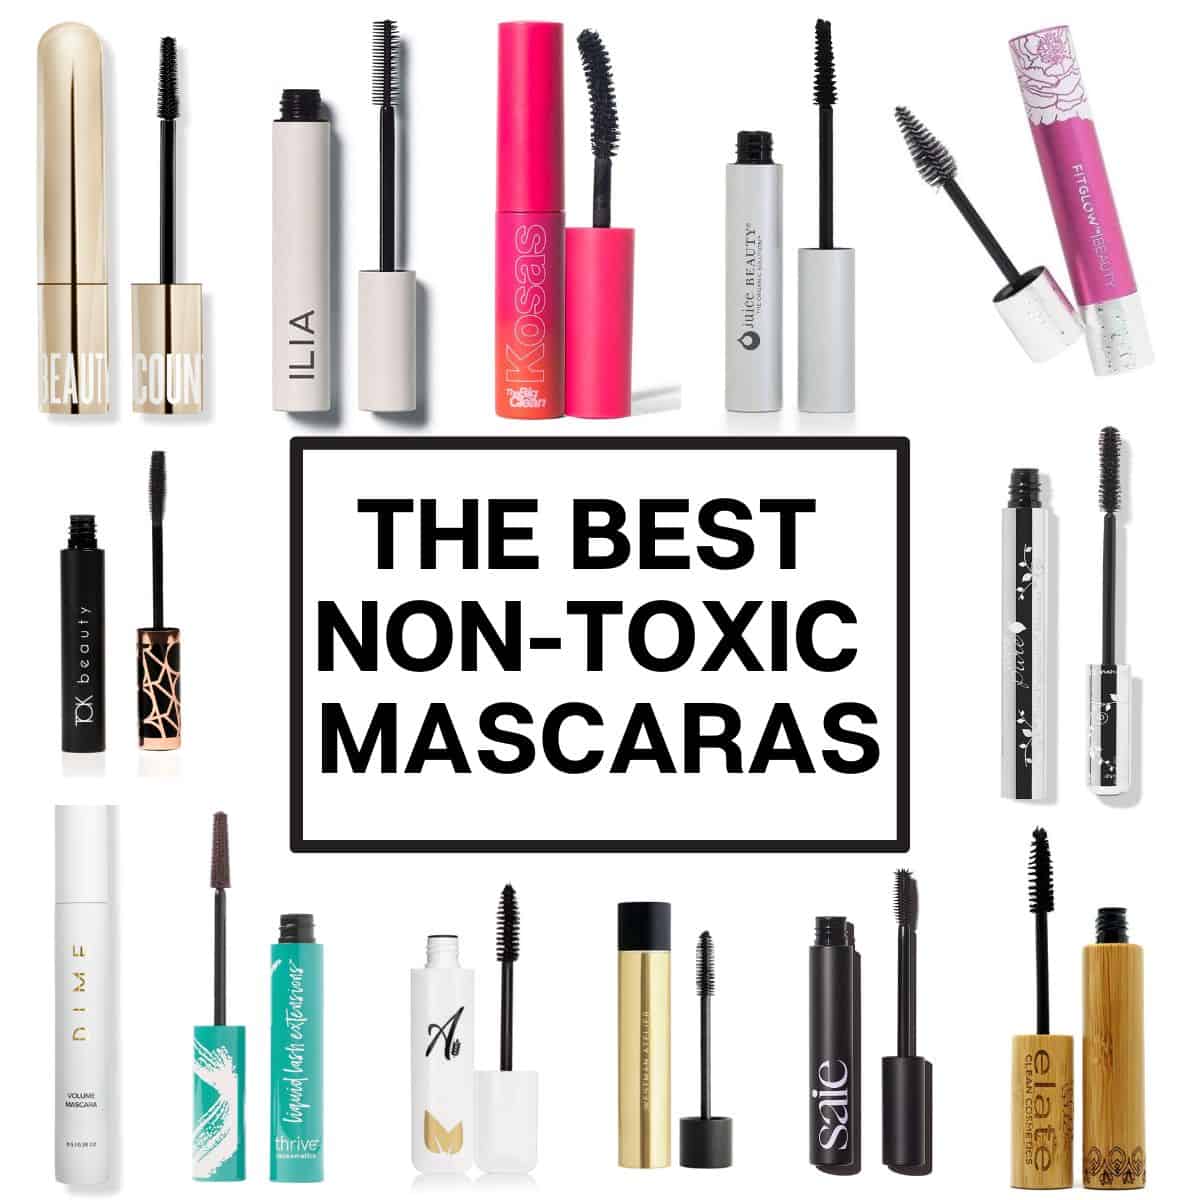 A collage of mascaras with the title The Best Non Toxic Mascaras over them.